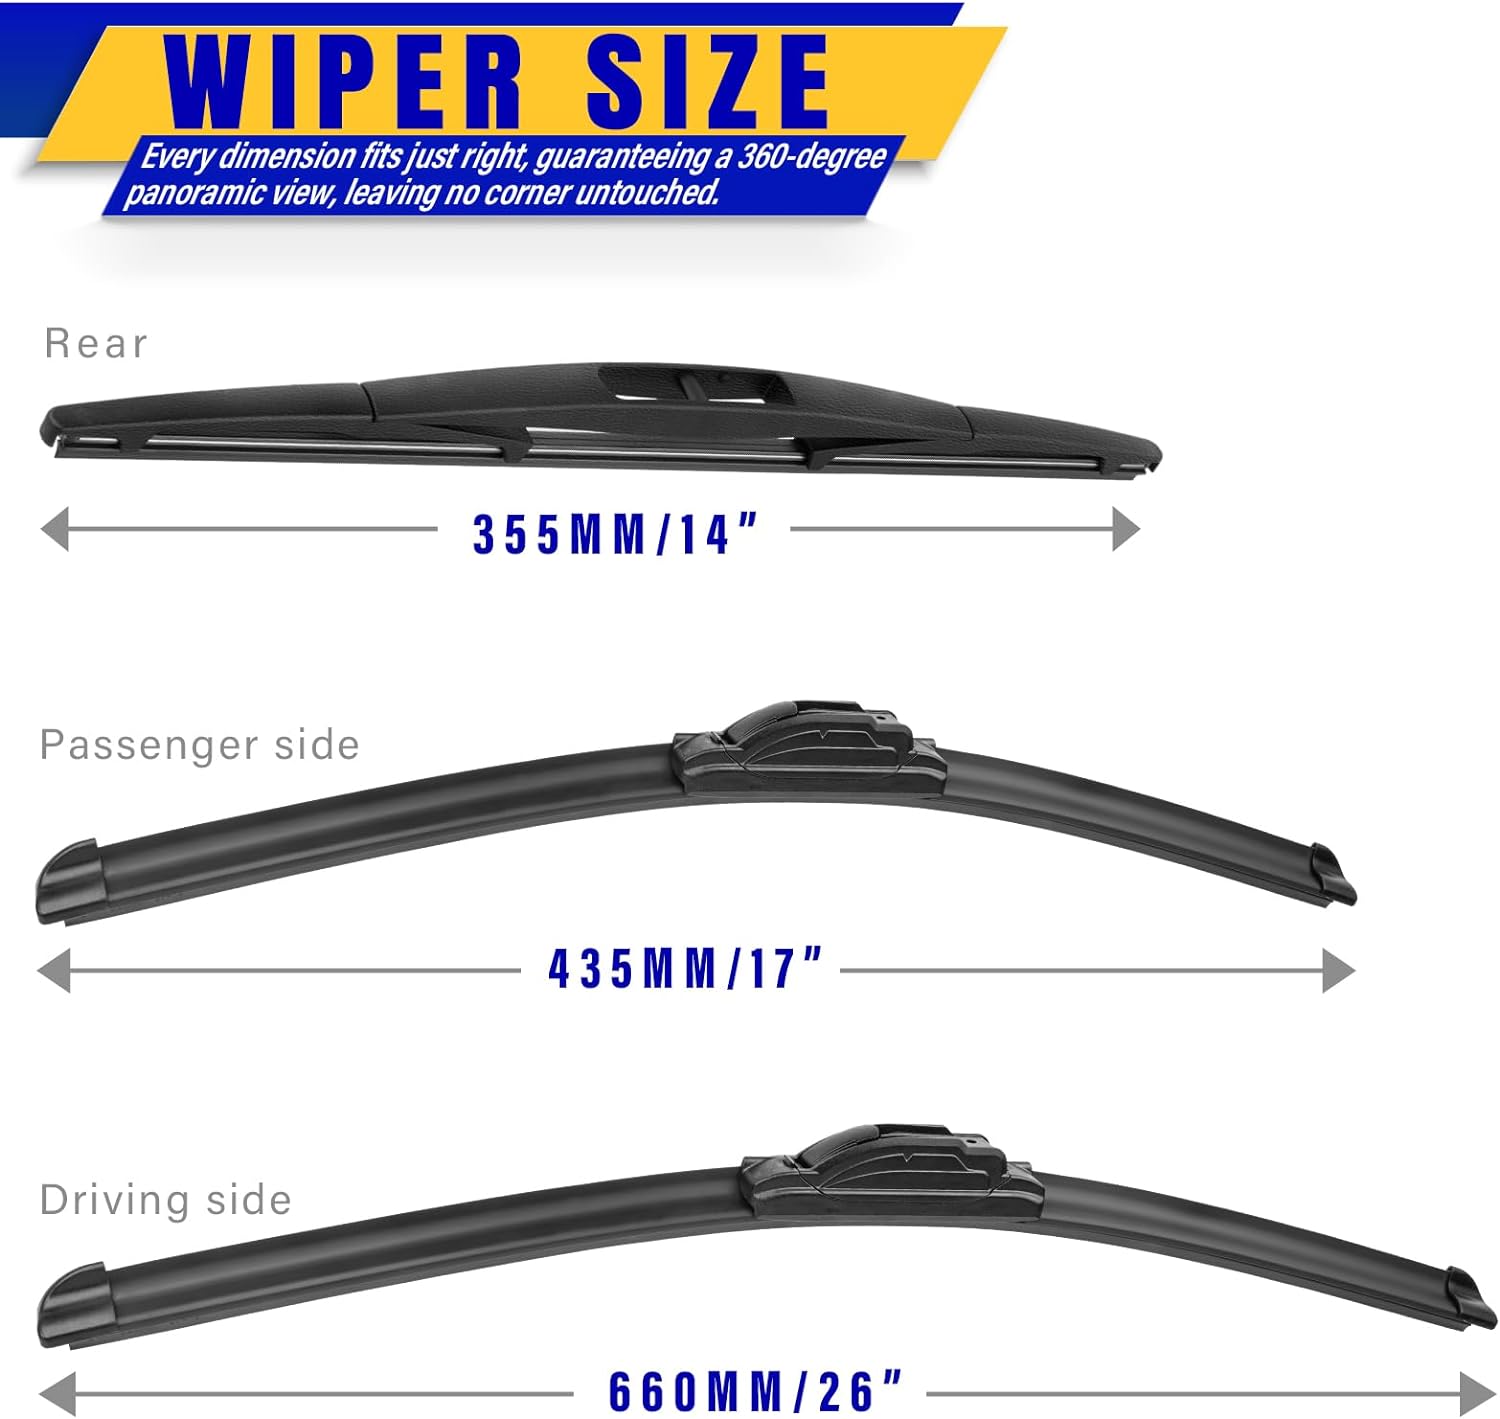 3 wipers Replacement for 2012-2018 Subaru Forester/2015-2019 Subaru Outback, Windshield Wiper Blades Original Equipment Replacement - 26"/17"/14" (Set of 3) U/J HOOK